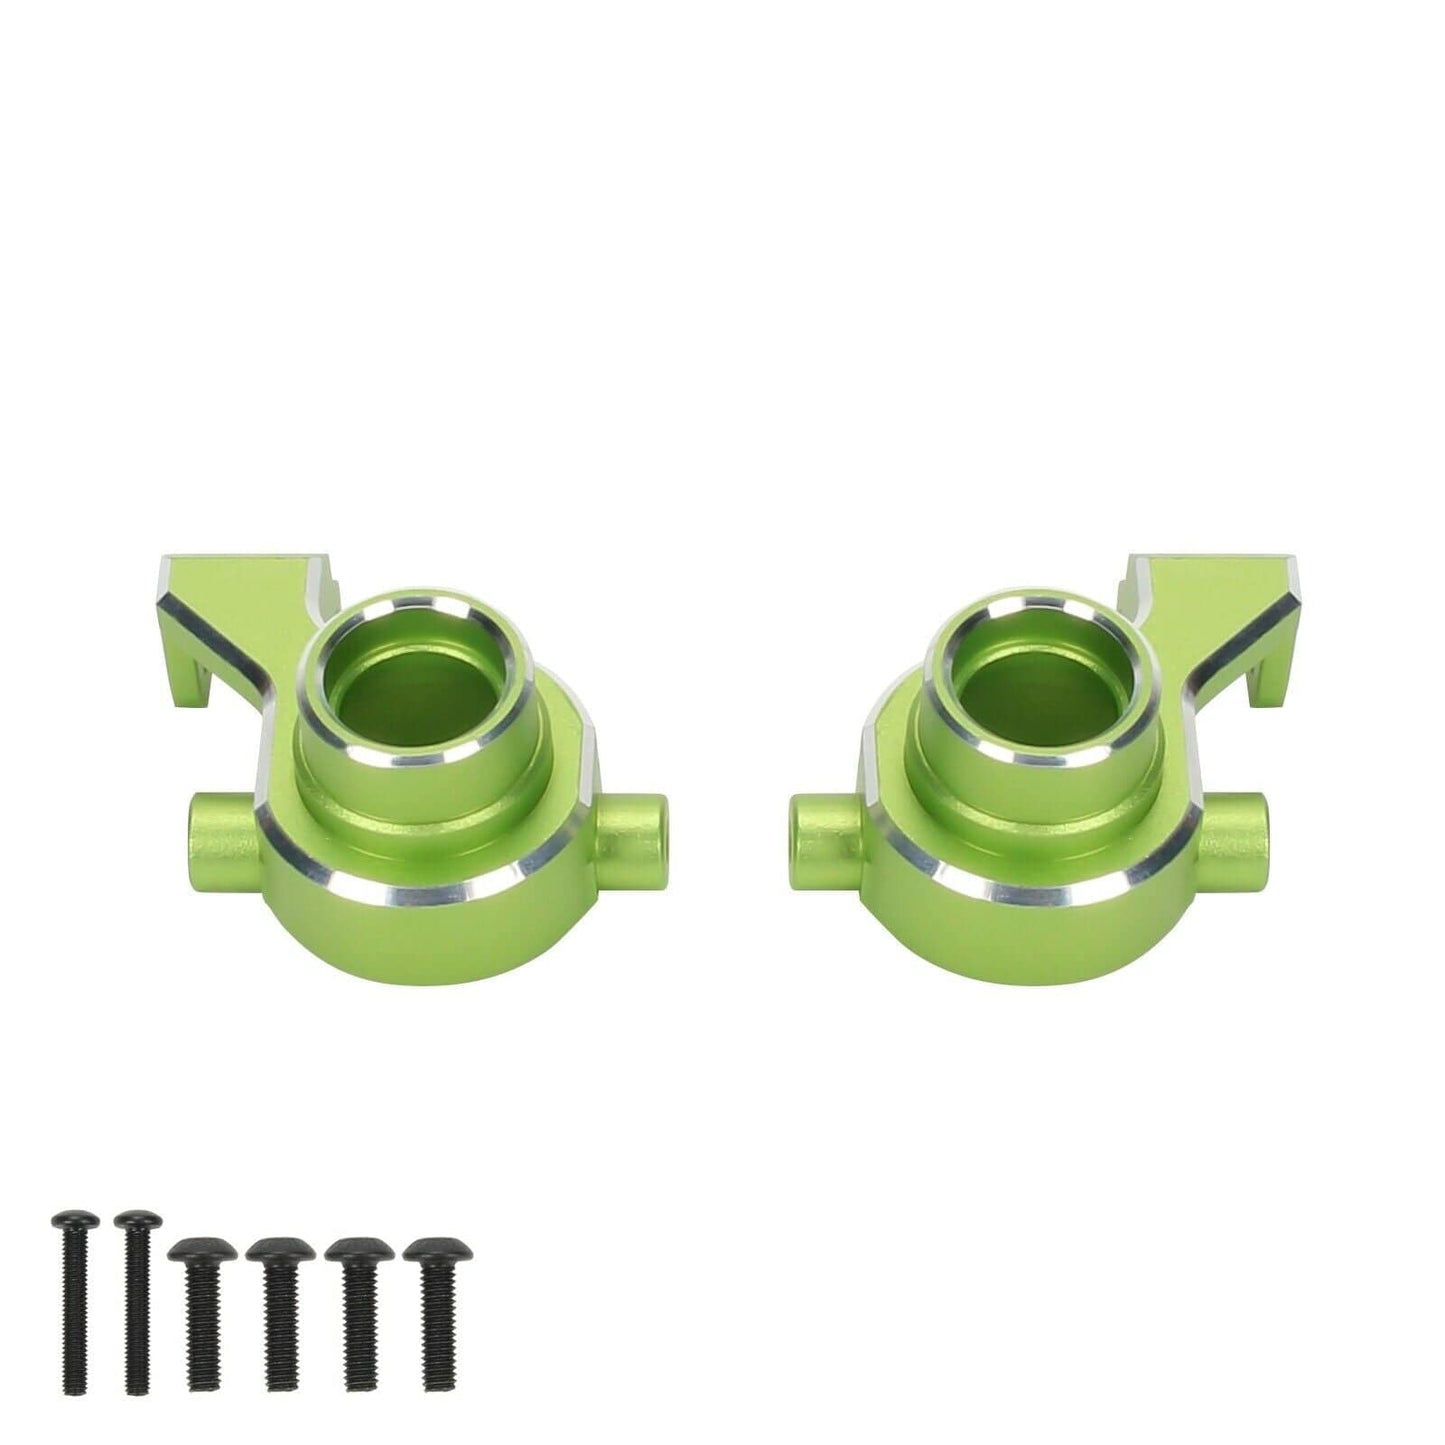 RCAWD Green Traxxas Maxx Steering blocks left & right 8937 RCAWD